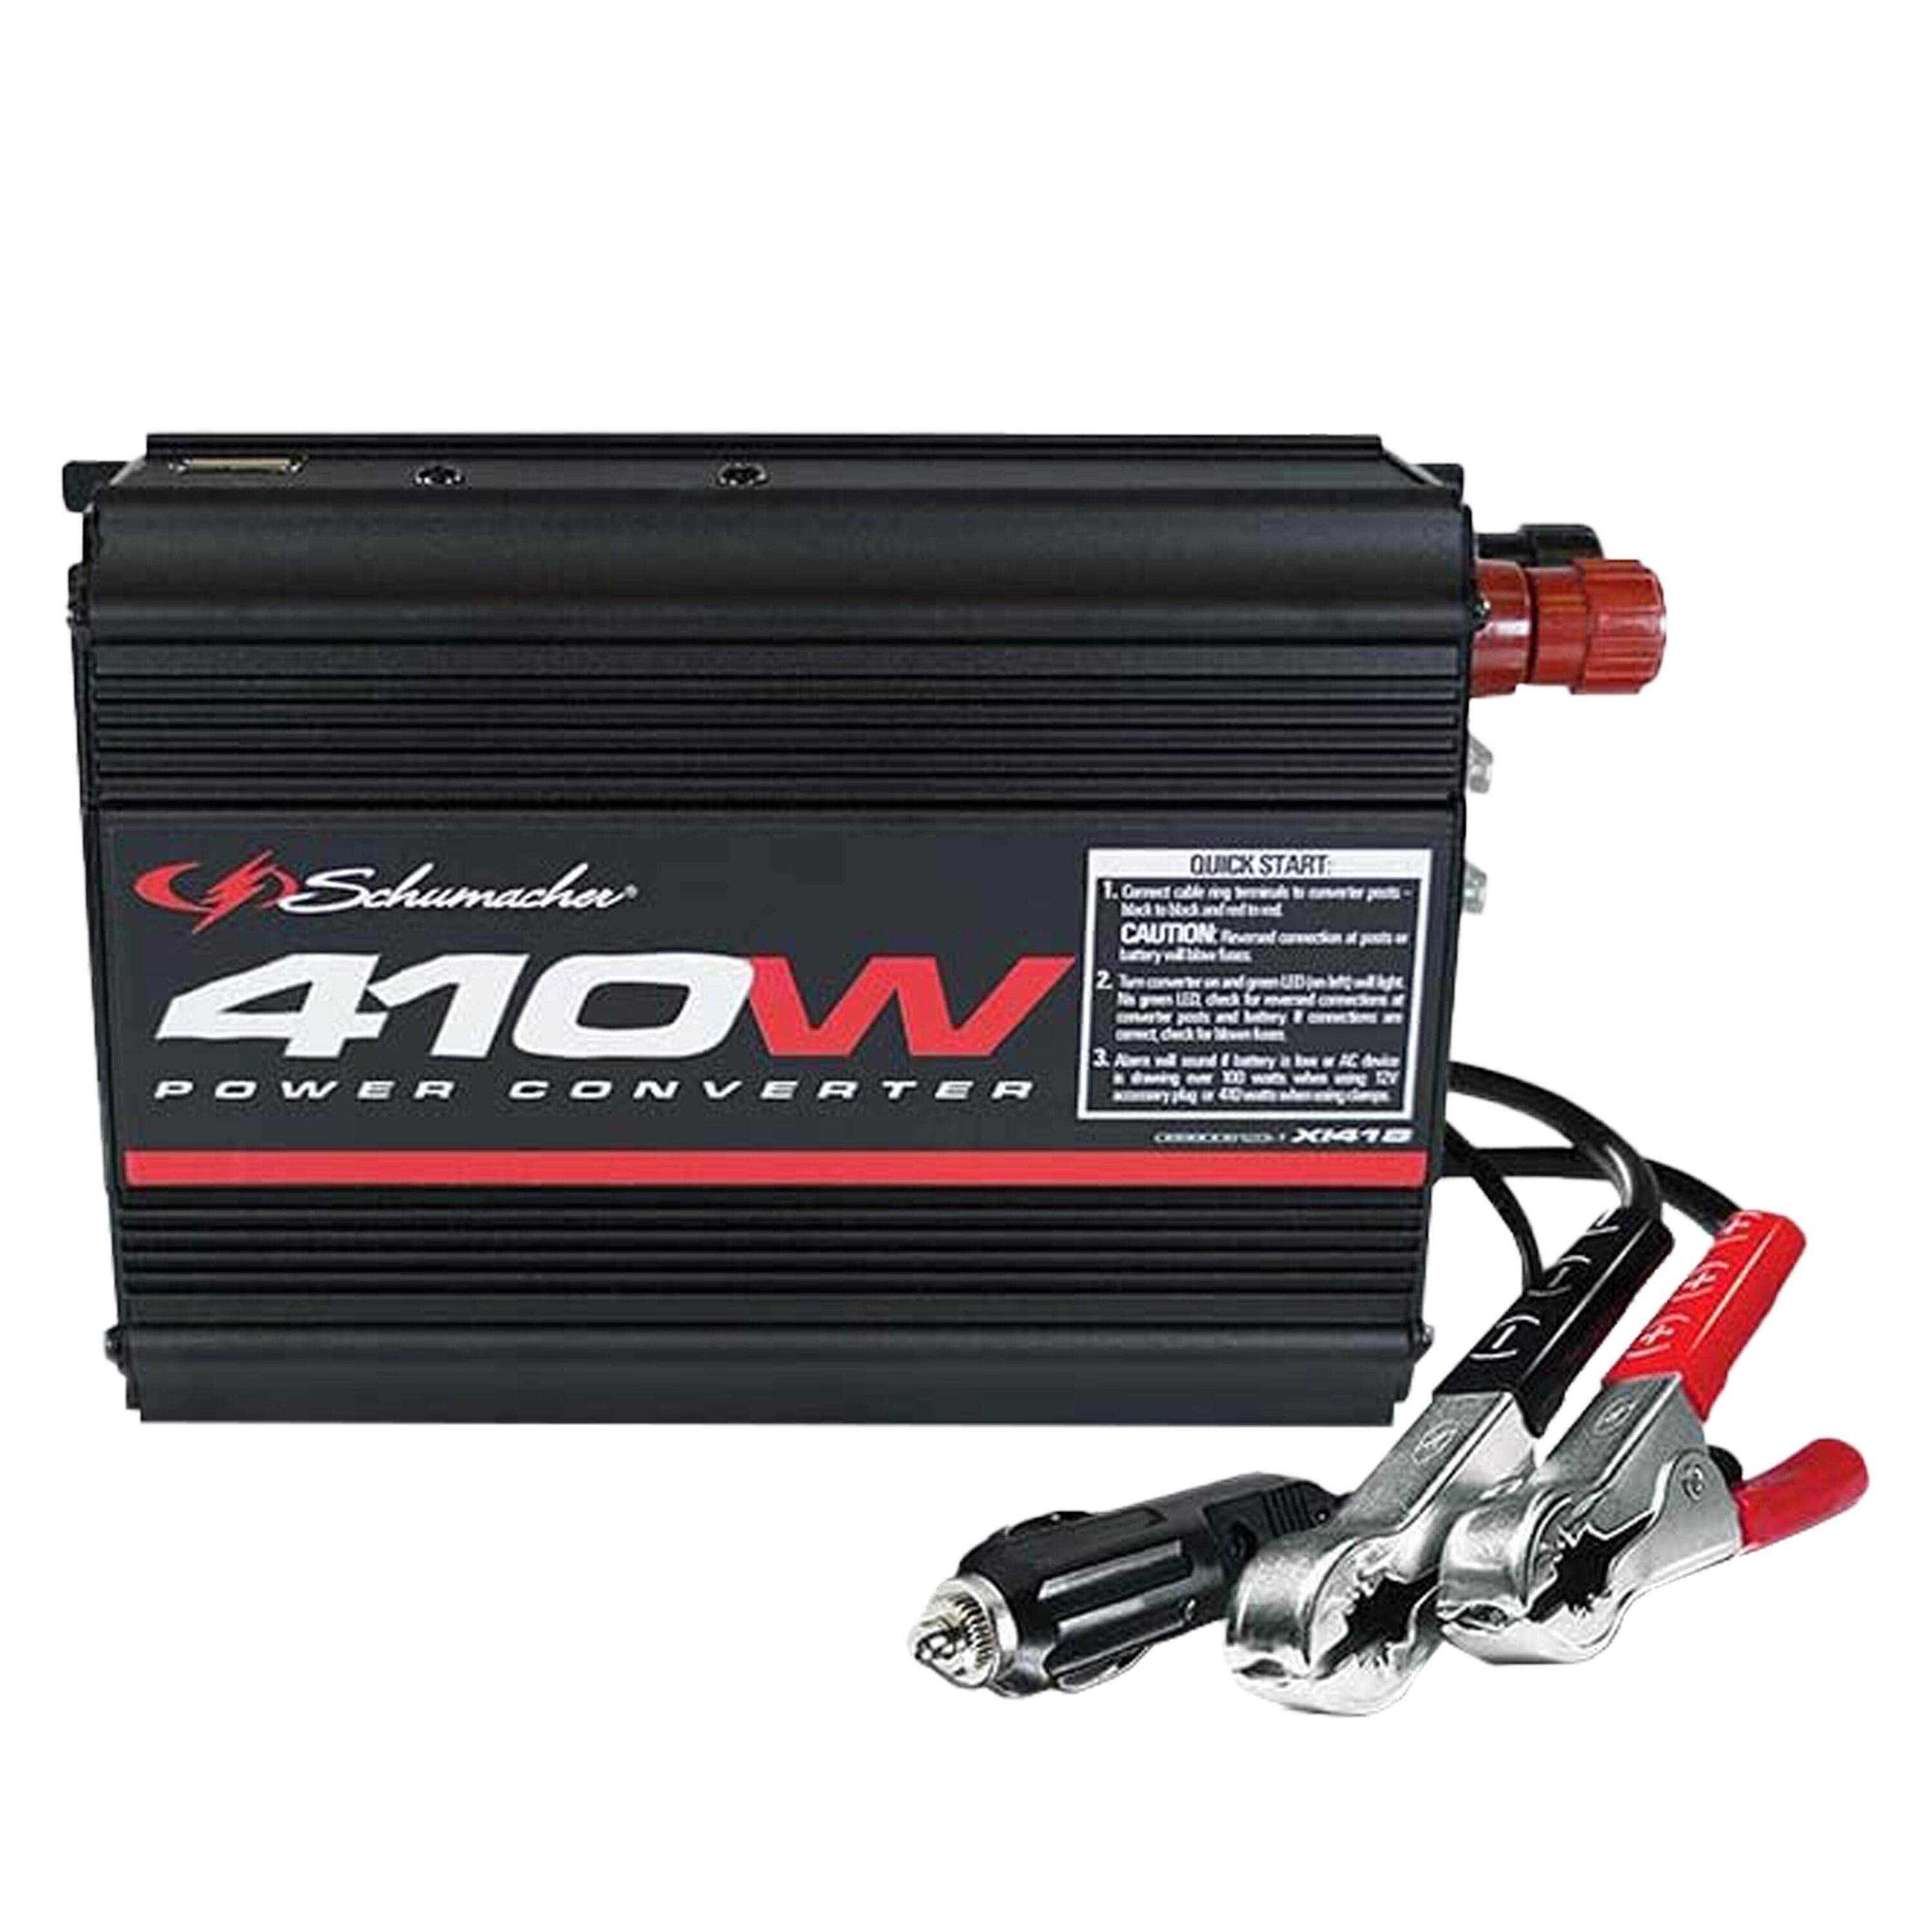 1000W PowerVerter Compact Inverter, 4 Outlets